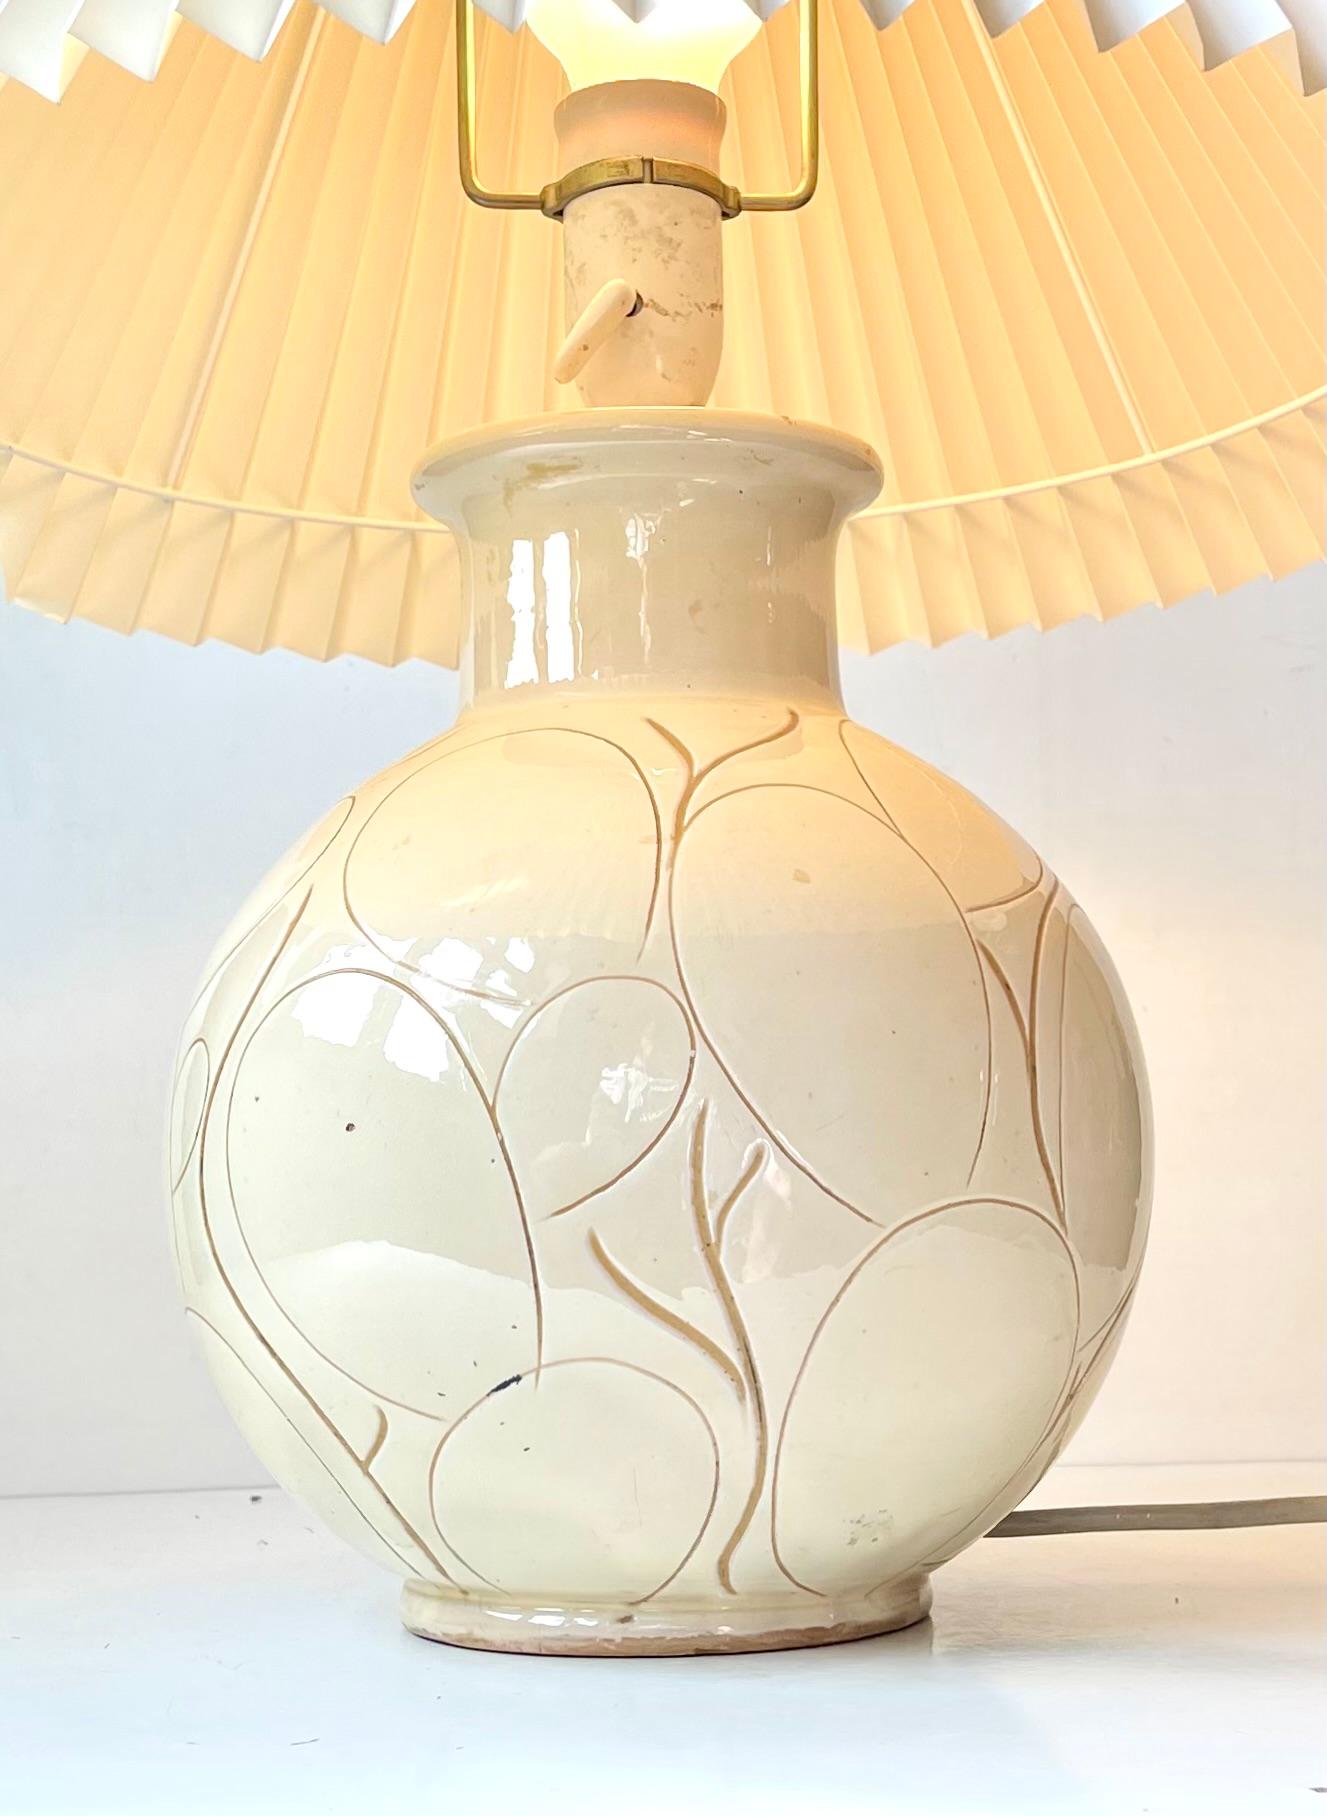 Large antique table lamp from the studio of Herman August Kähler. Monochrome cream pastel glaze with organic decor/incisions. Executed in Denmark circa 1920 and hugely inspired by the Art Nouveau movement. Signed HAK, Denmark and number 766. It